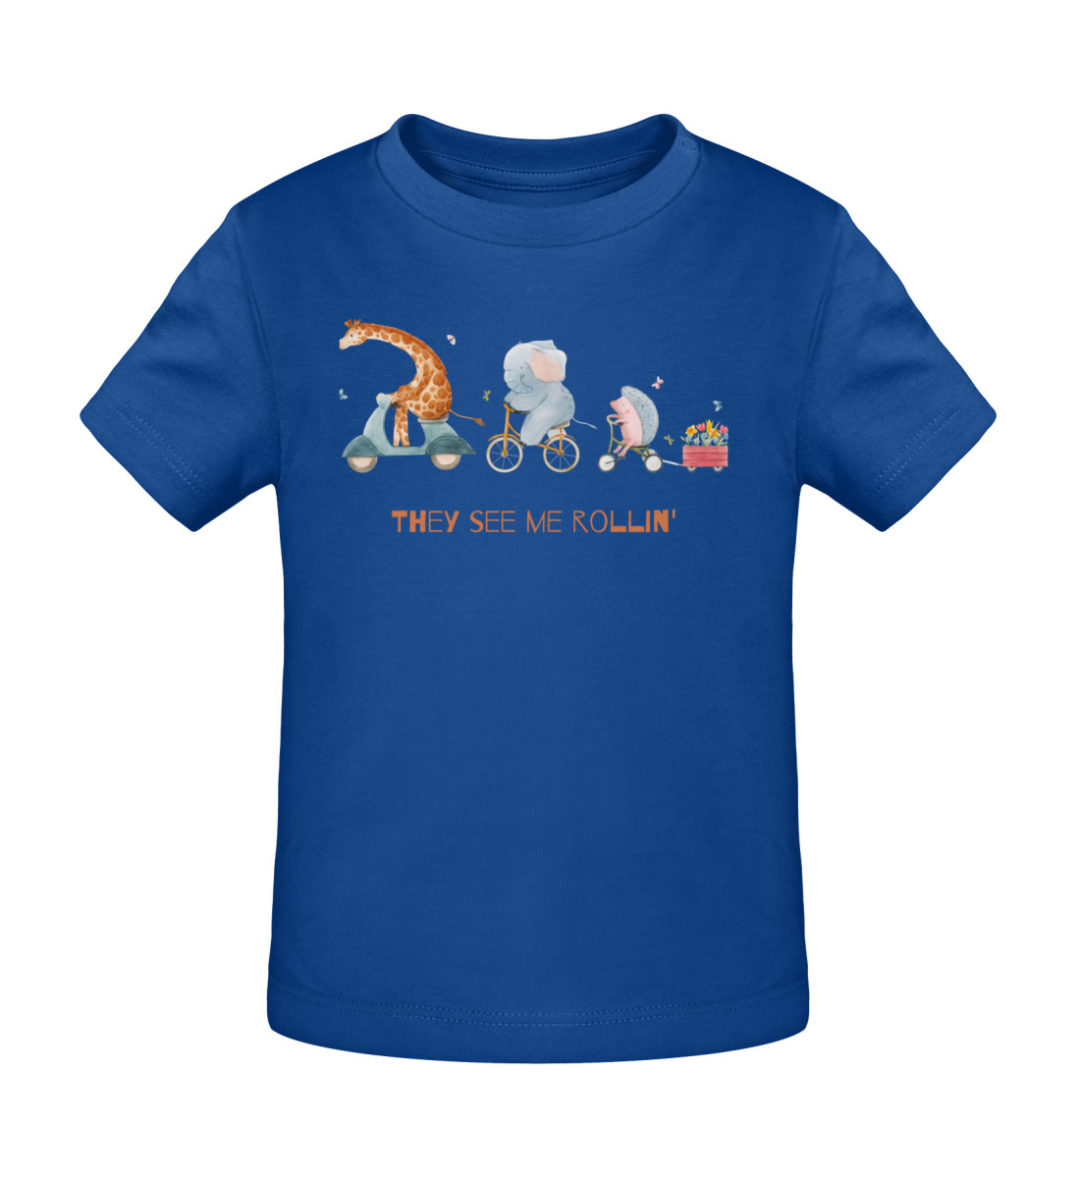 They see me rollin- - Baby Creator T-Shirt ST/ST-7106